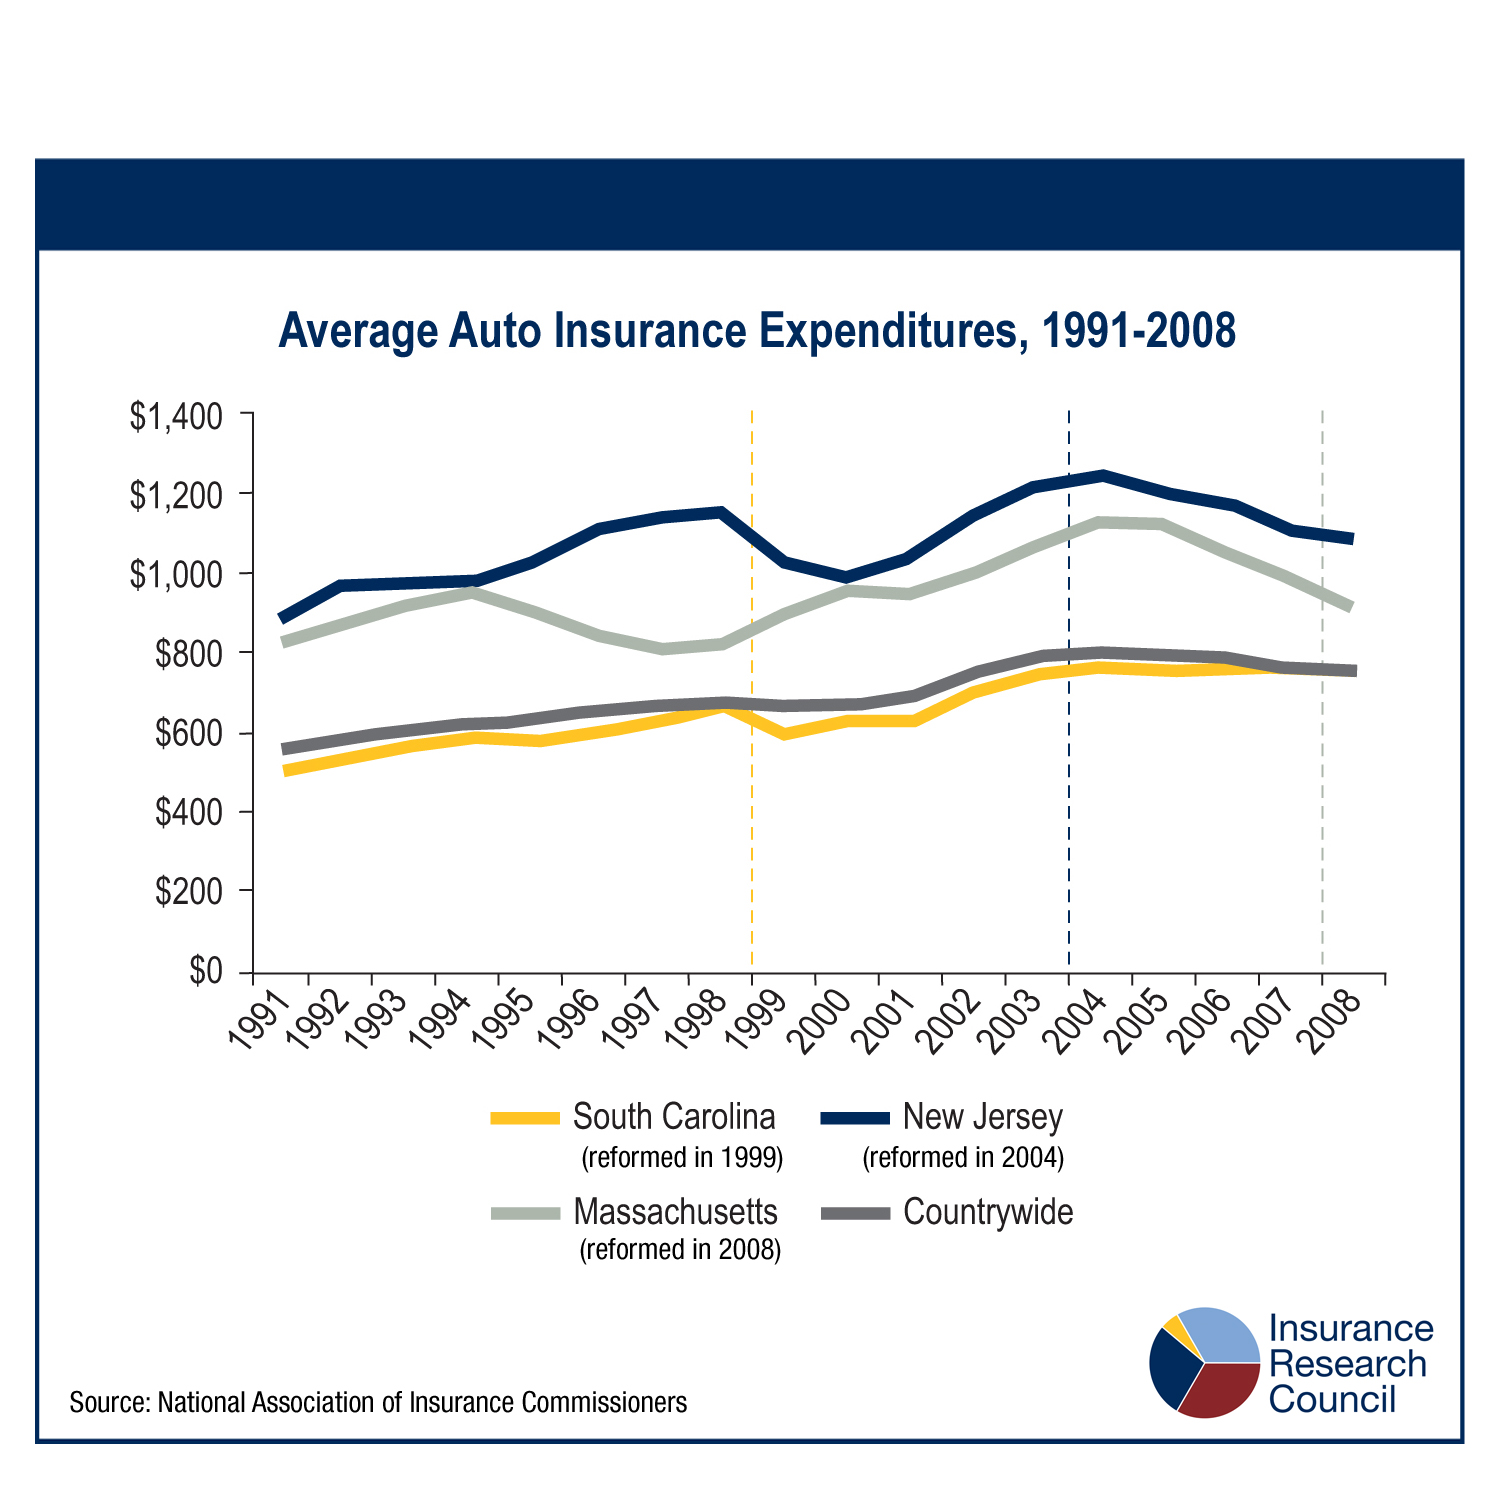 ... Benefits of Rate Regulatory Reforms in Automobile Insurance Markets